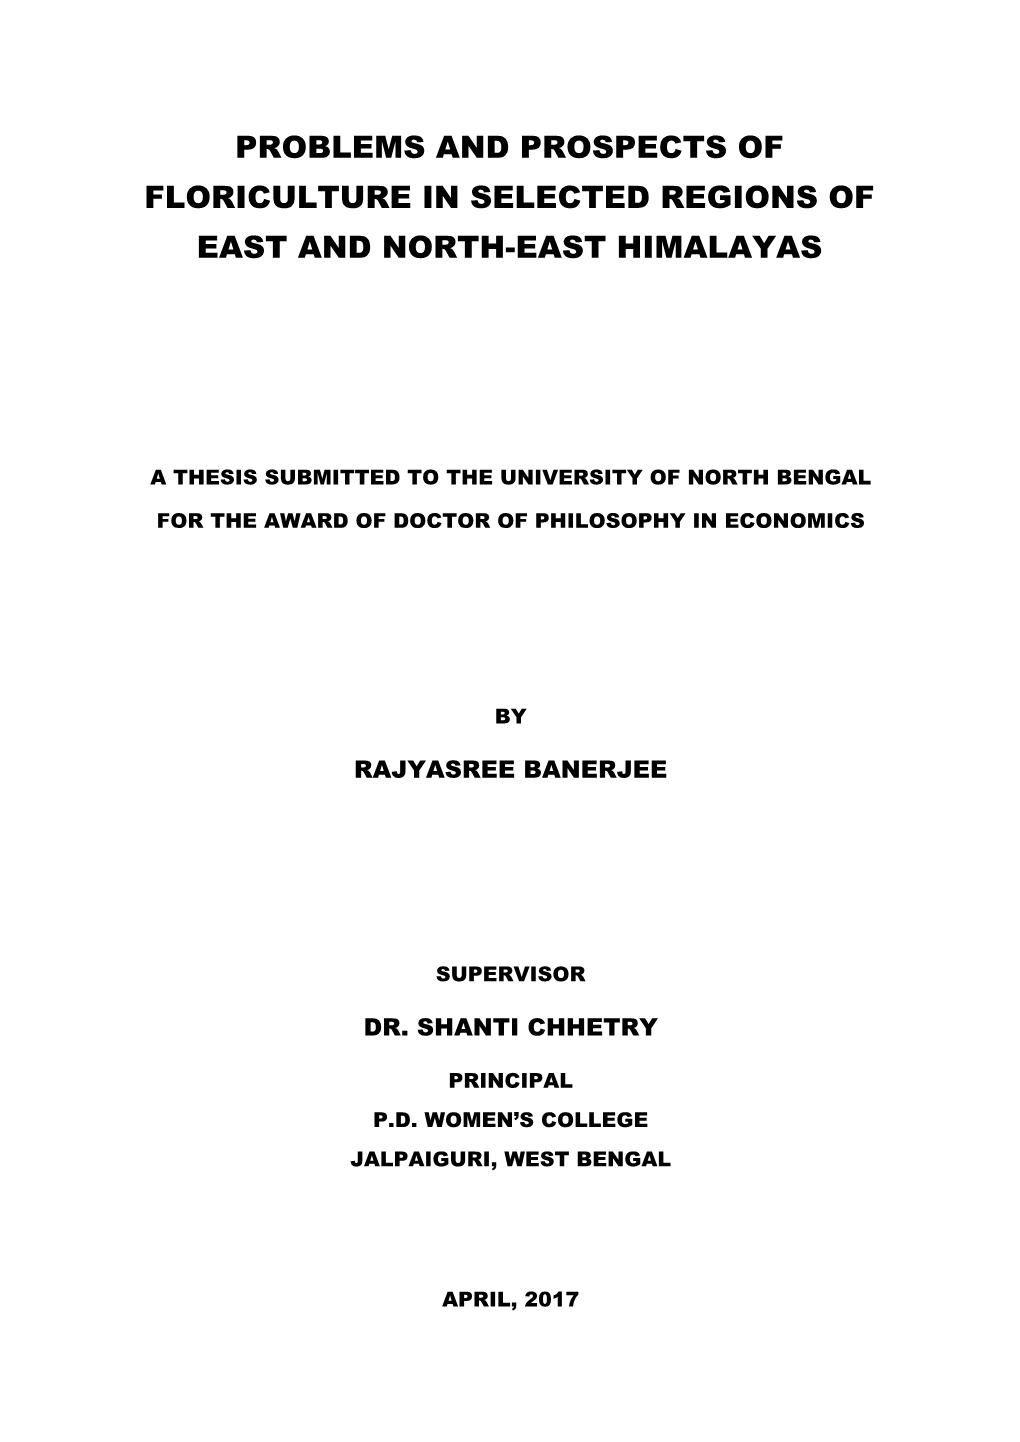 Problems and Prospects of Floriculture in Selected Regions of East and North-East Himalayas